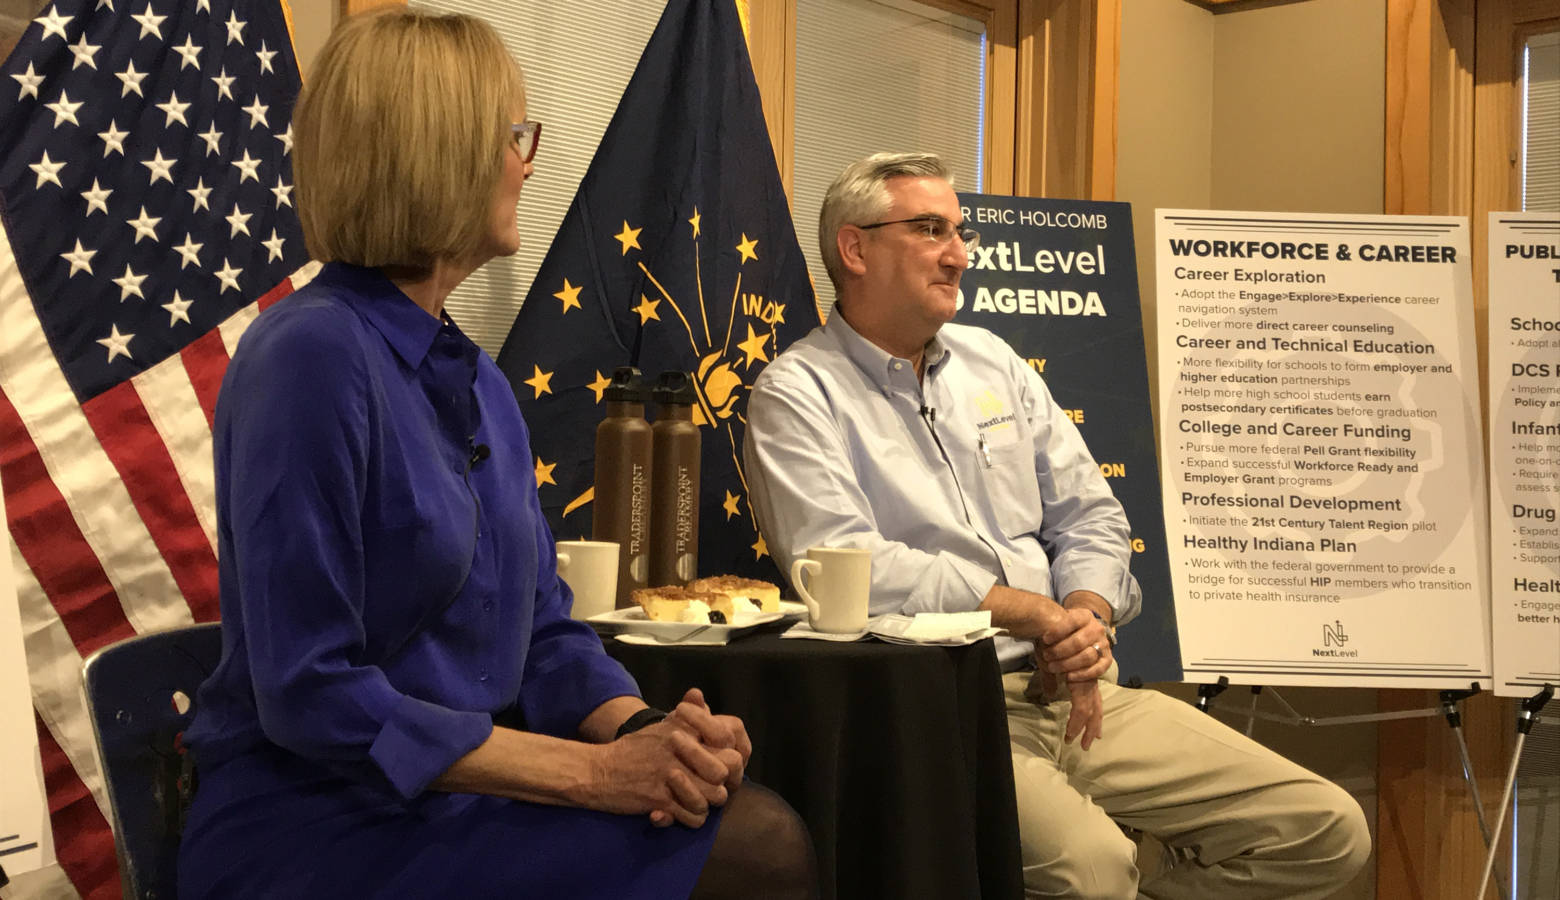 Gov. Eric Holcomb discusses his 2019 agenda, which includes grants to help build out trail systems statewide. (Brandon Smith/IPB News)